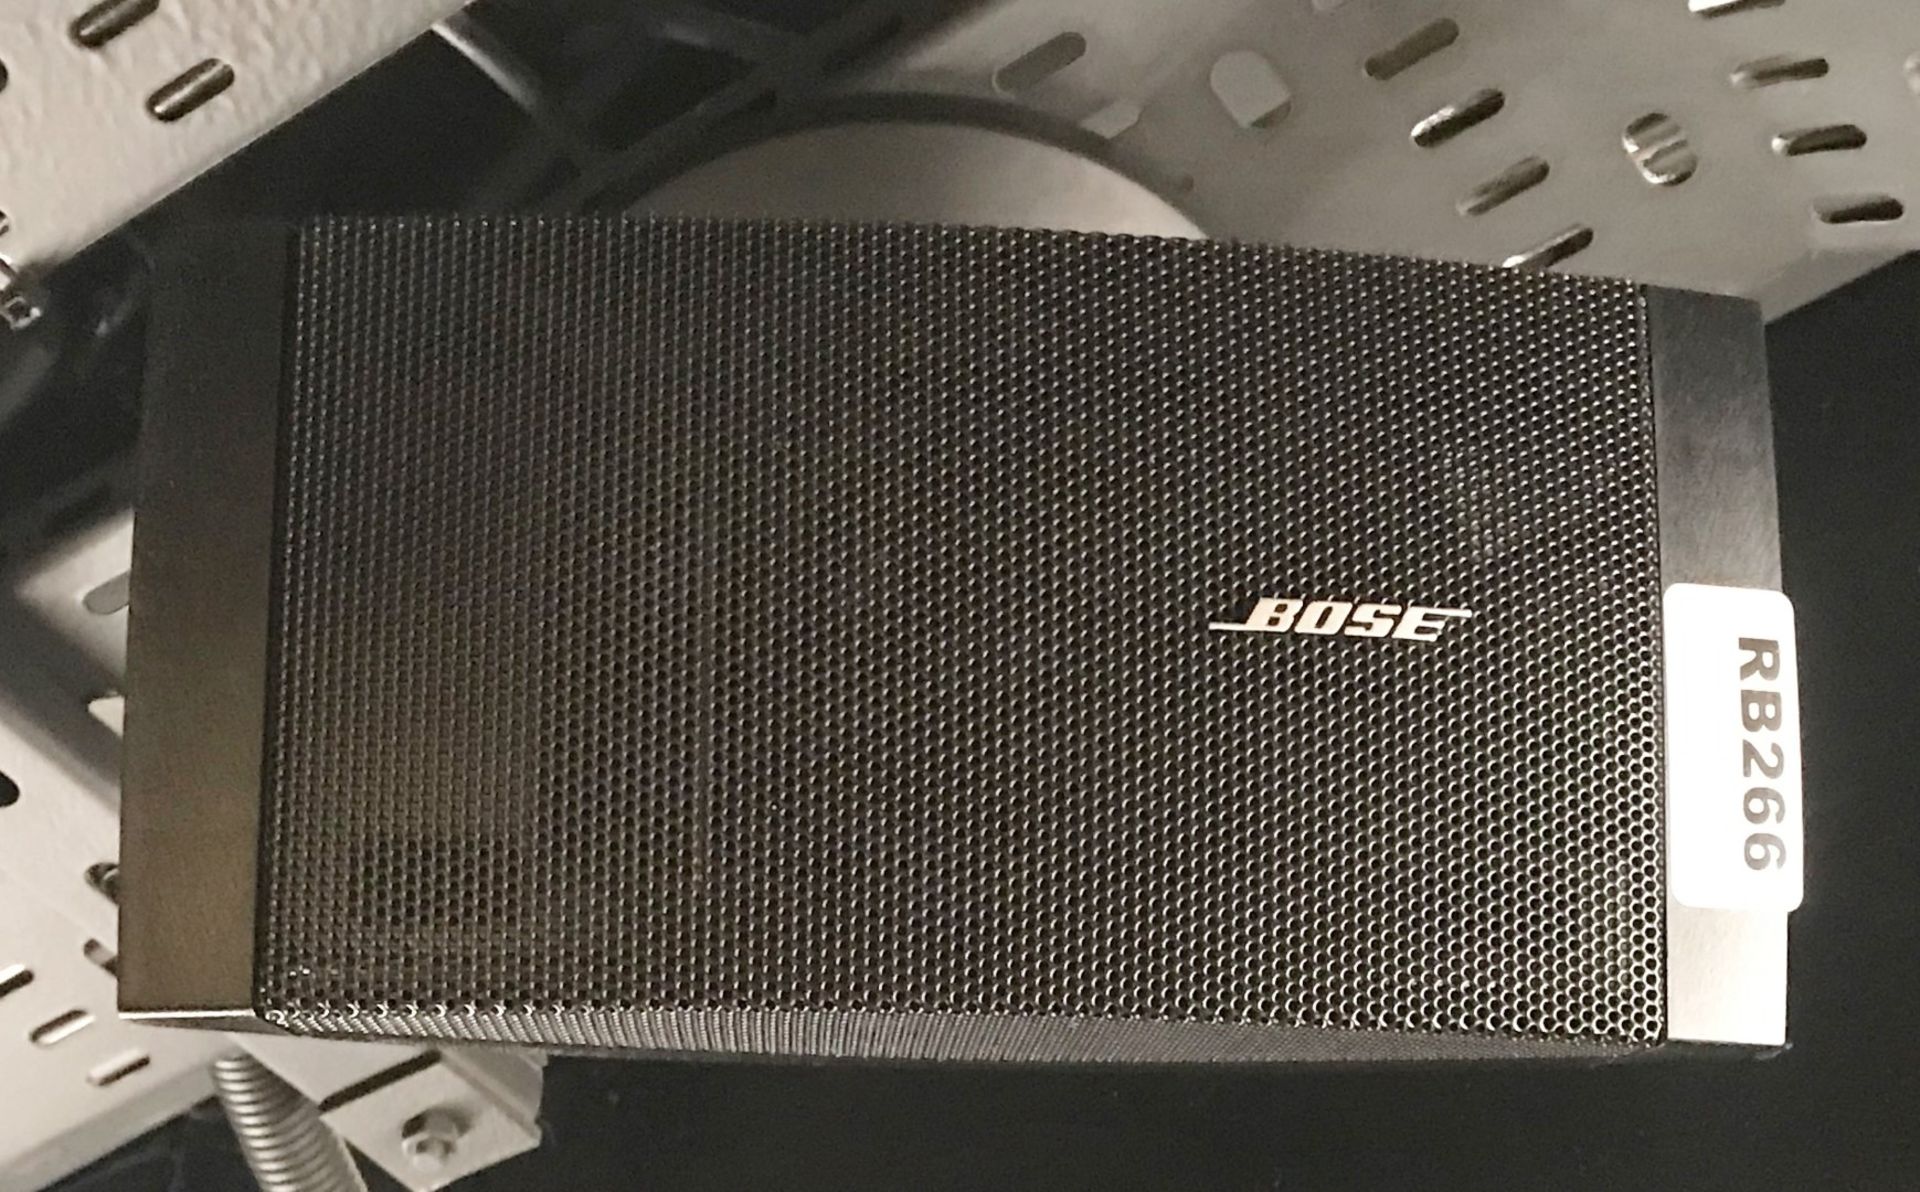 1 x Bose FreeSpace DS16S Indoor Surface-Mount Loudspeaker in Black - RRP £150 - CL584 - Location: - Image 5 of 5